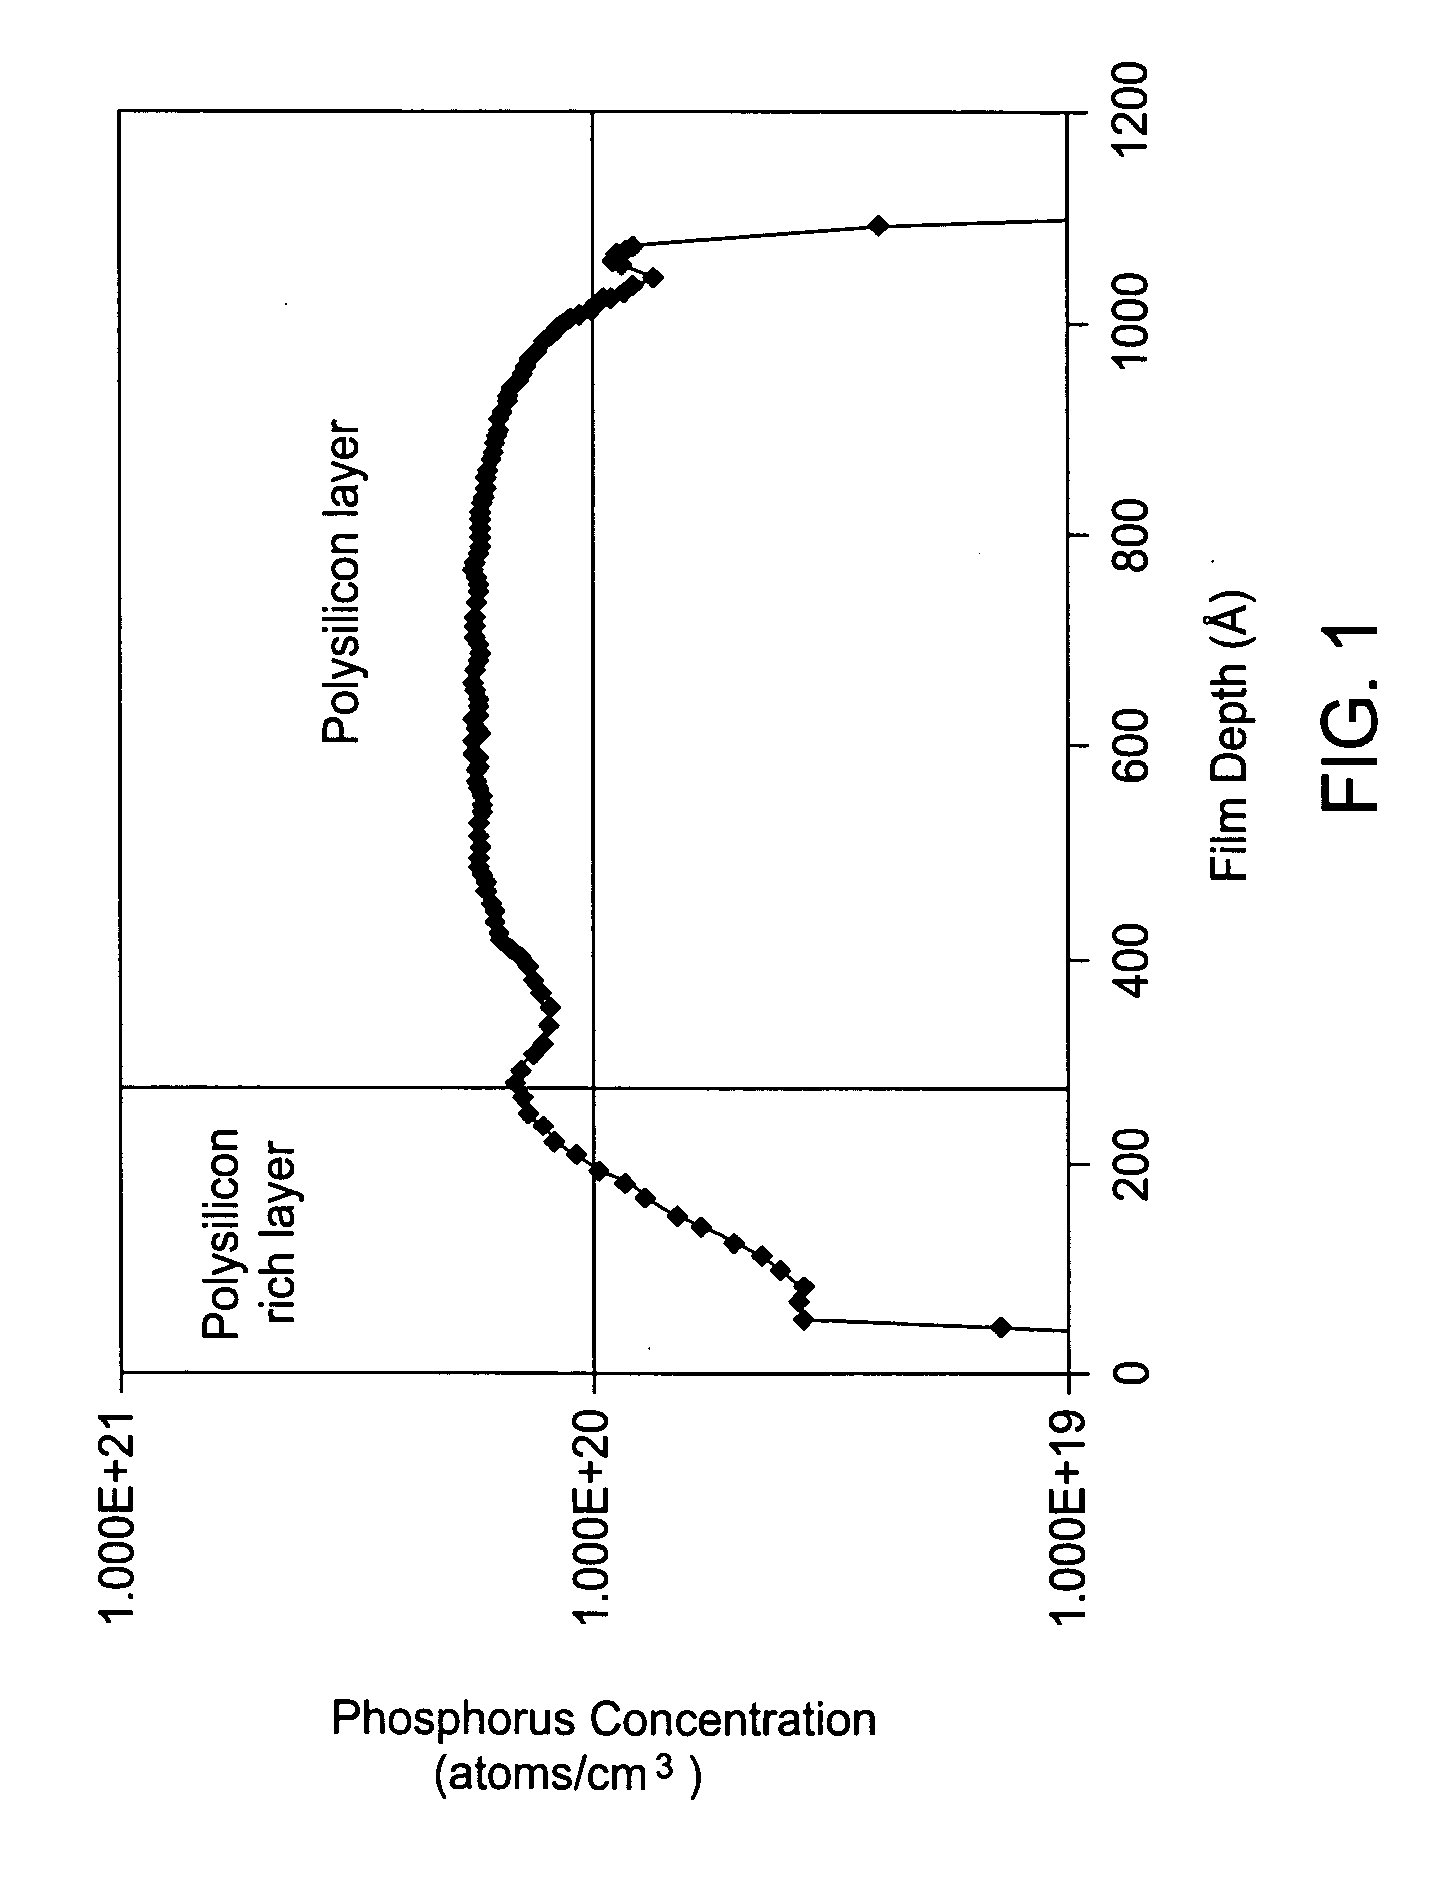 Thin tungsten silicide layer deposition and gate metal integration